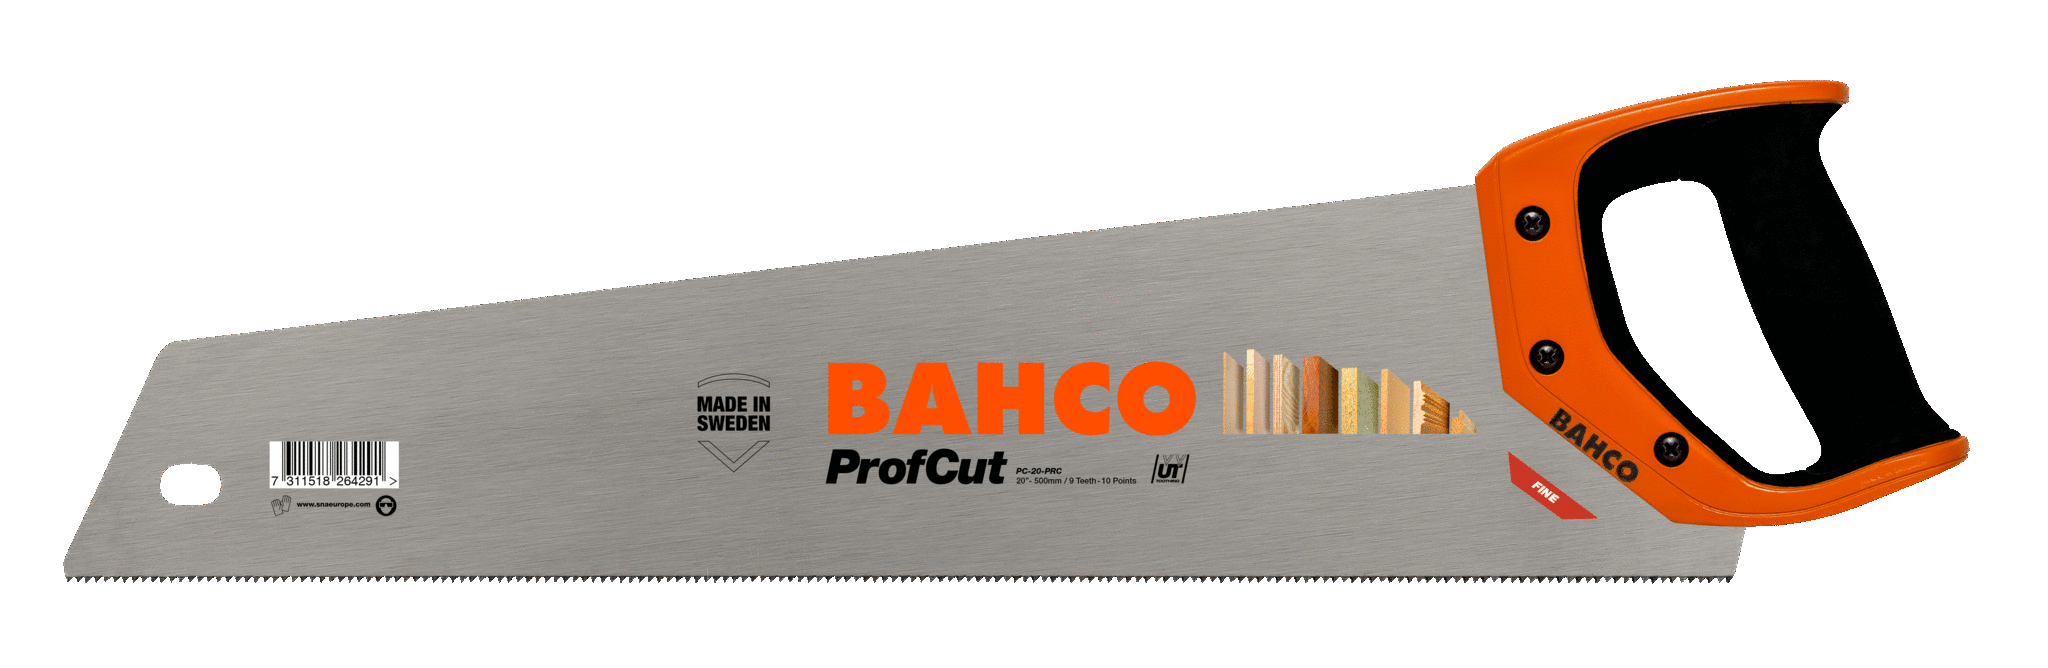 500mm ProfCut™ Sawblades for Fine/Medium Thick Material PC-PRC by Bahco